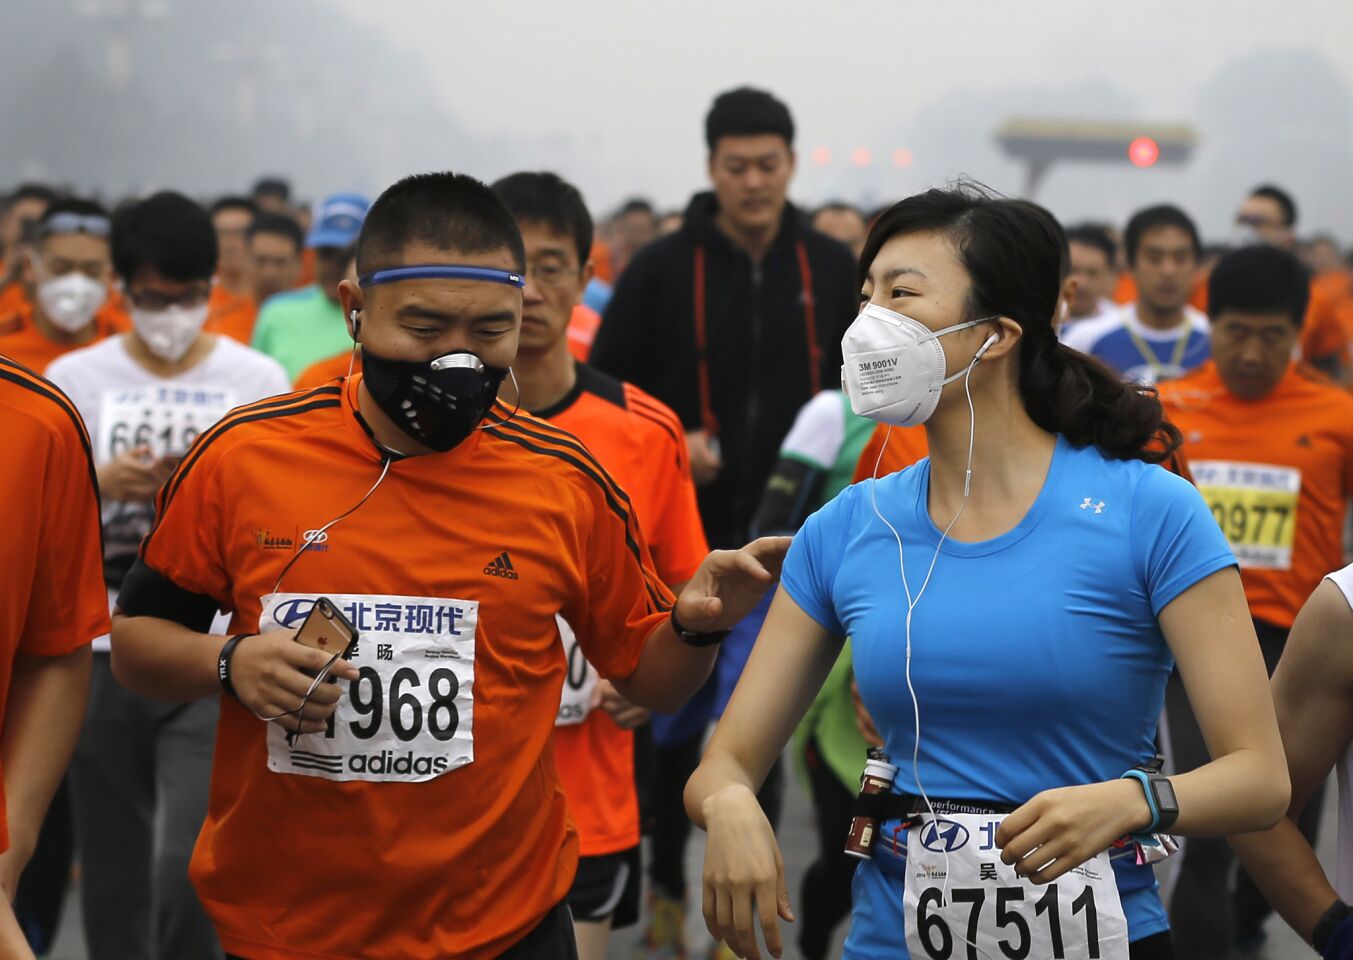 Runners wearing masks to protect themselves from pollutants jog past Chang'an Avenue near Tiananmen Square shrouded in haze while taking part in the 2014 Beijing International Marathon on Oct. 19.